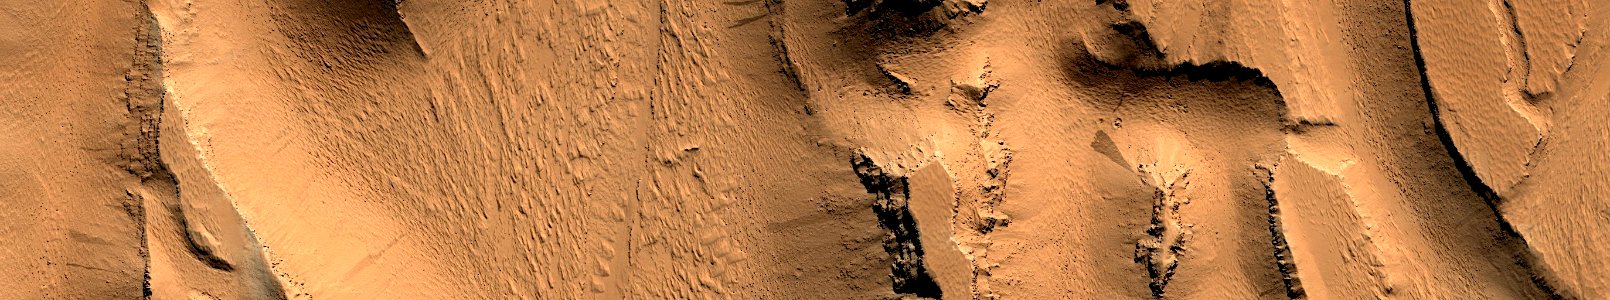 Mars - Channels in Olympica Fossae photo